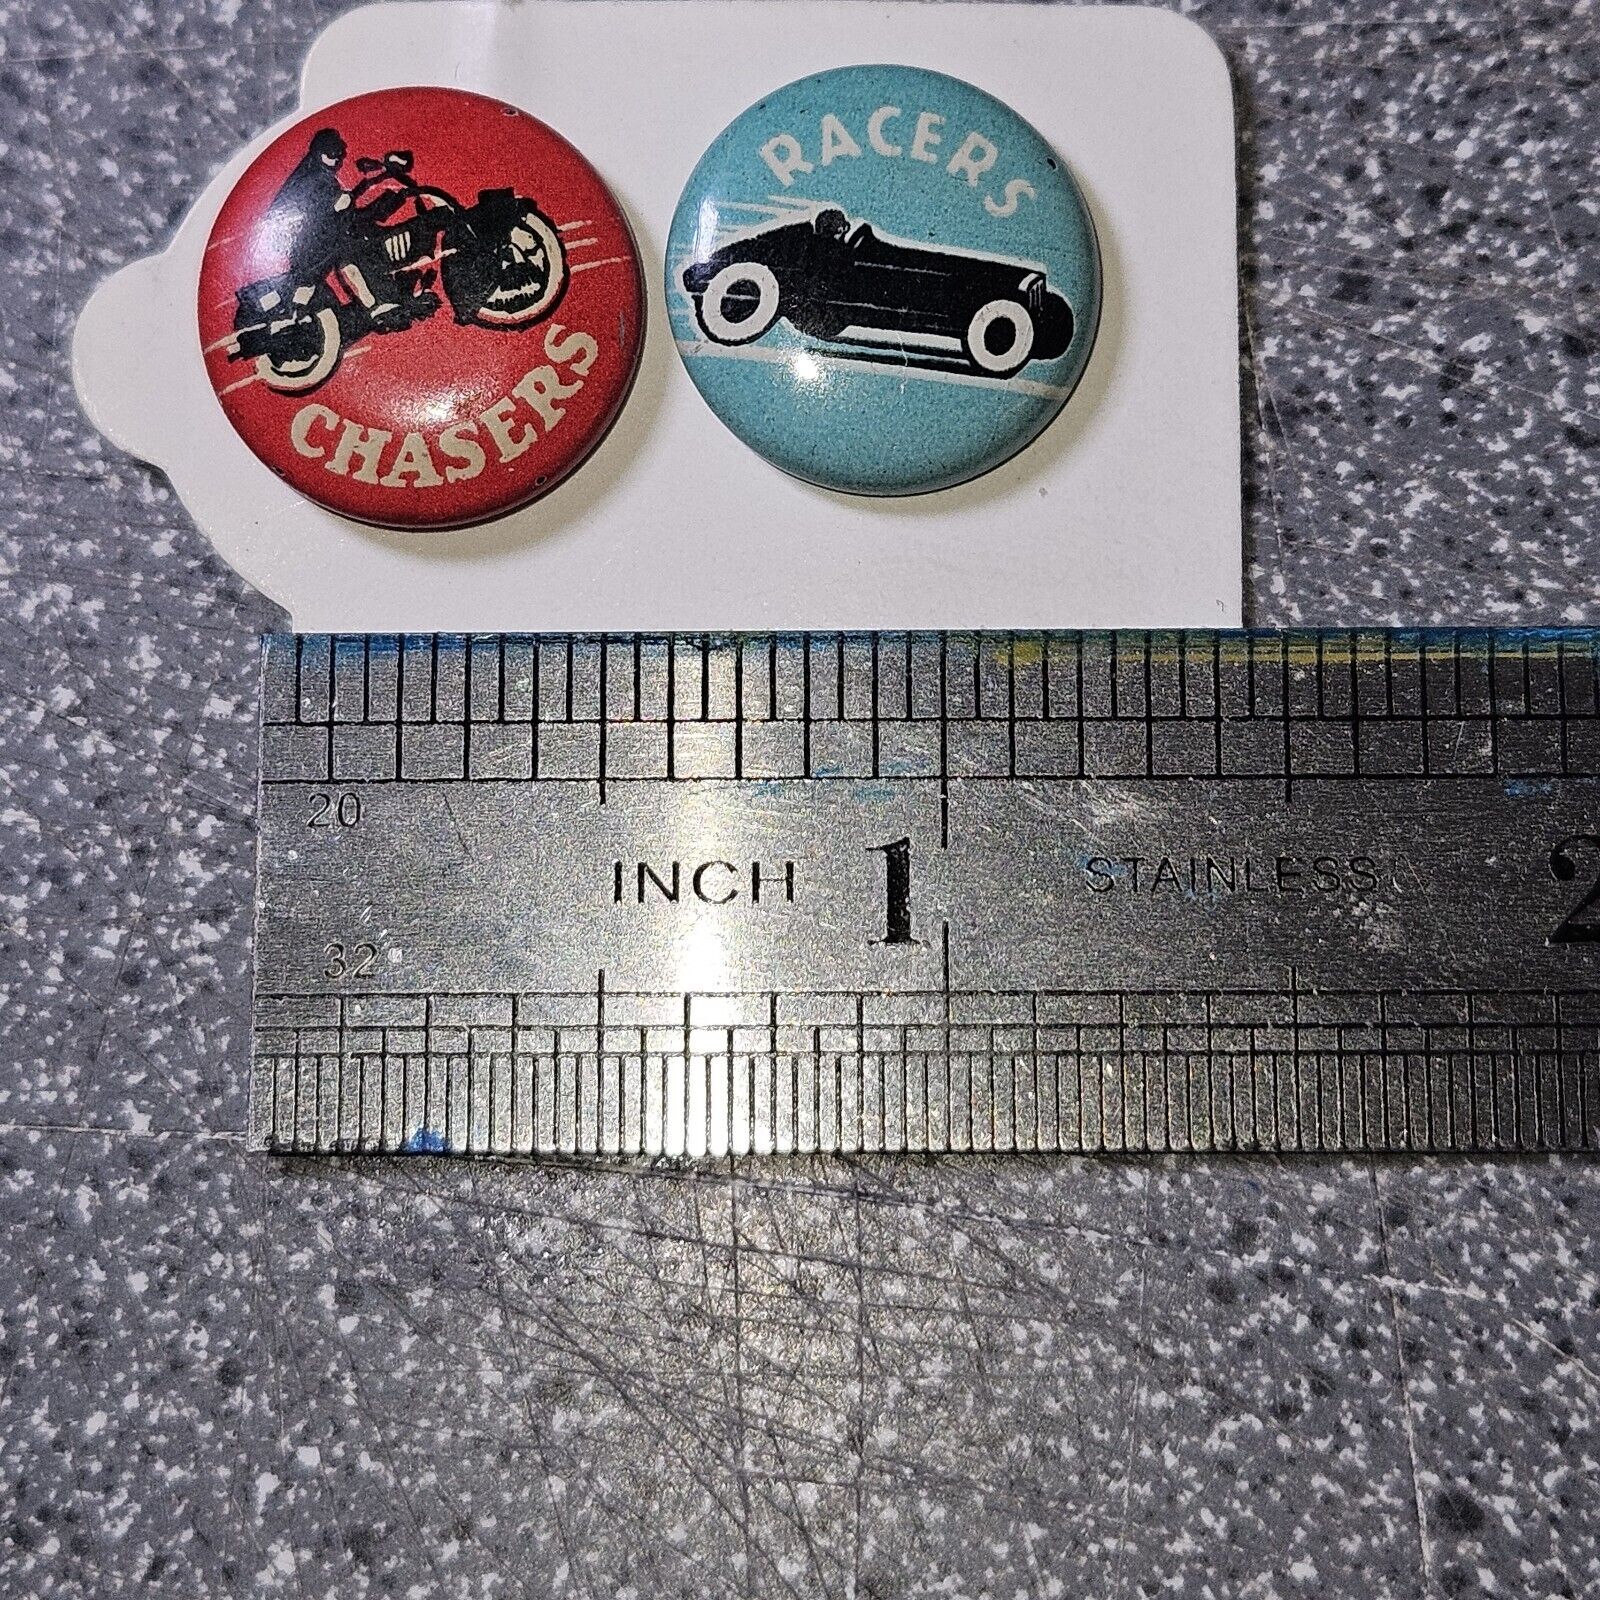 Chasers And Racers Pin Back Buttons Savid C Cook Publishing Amazing Condition 